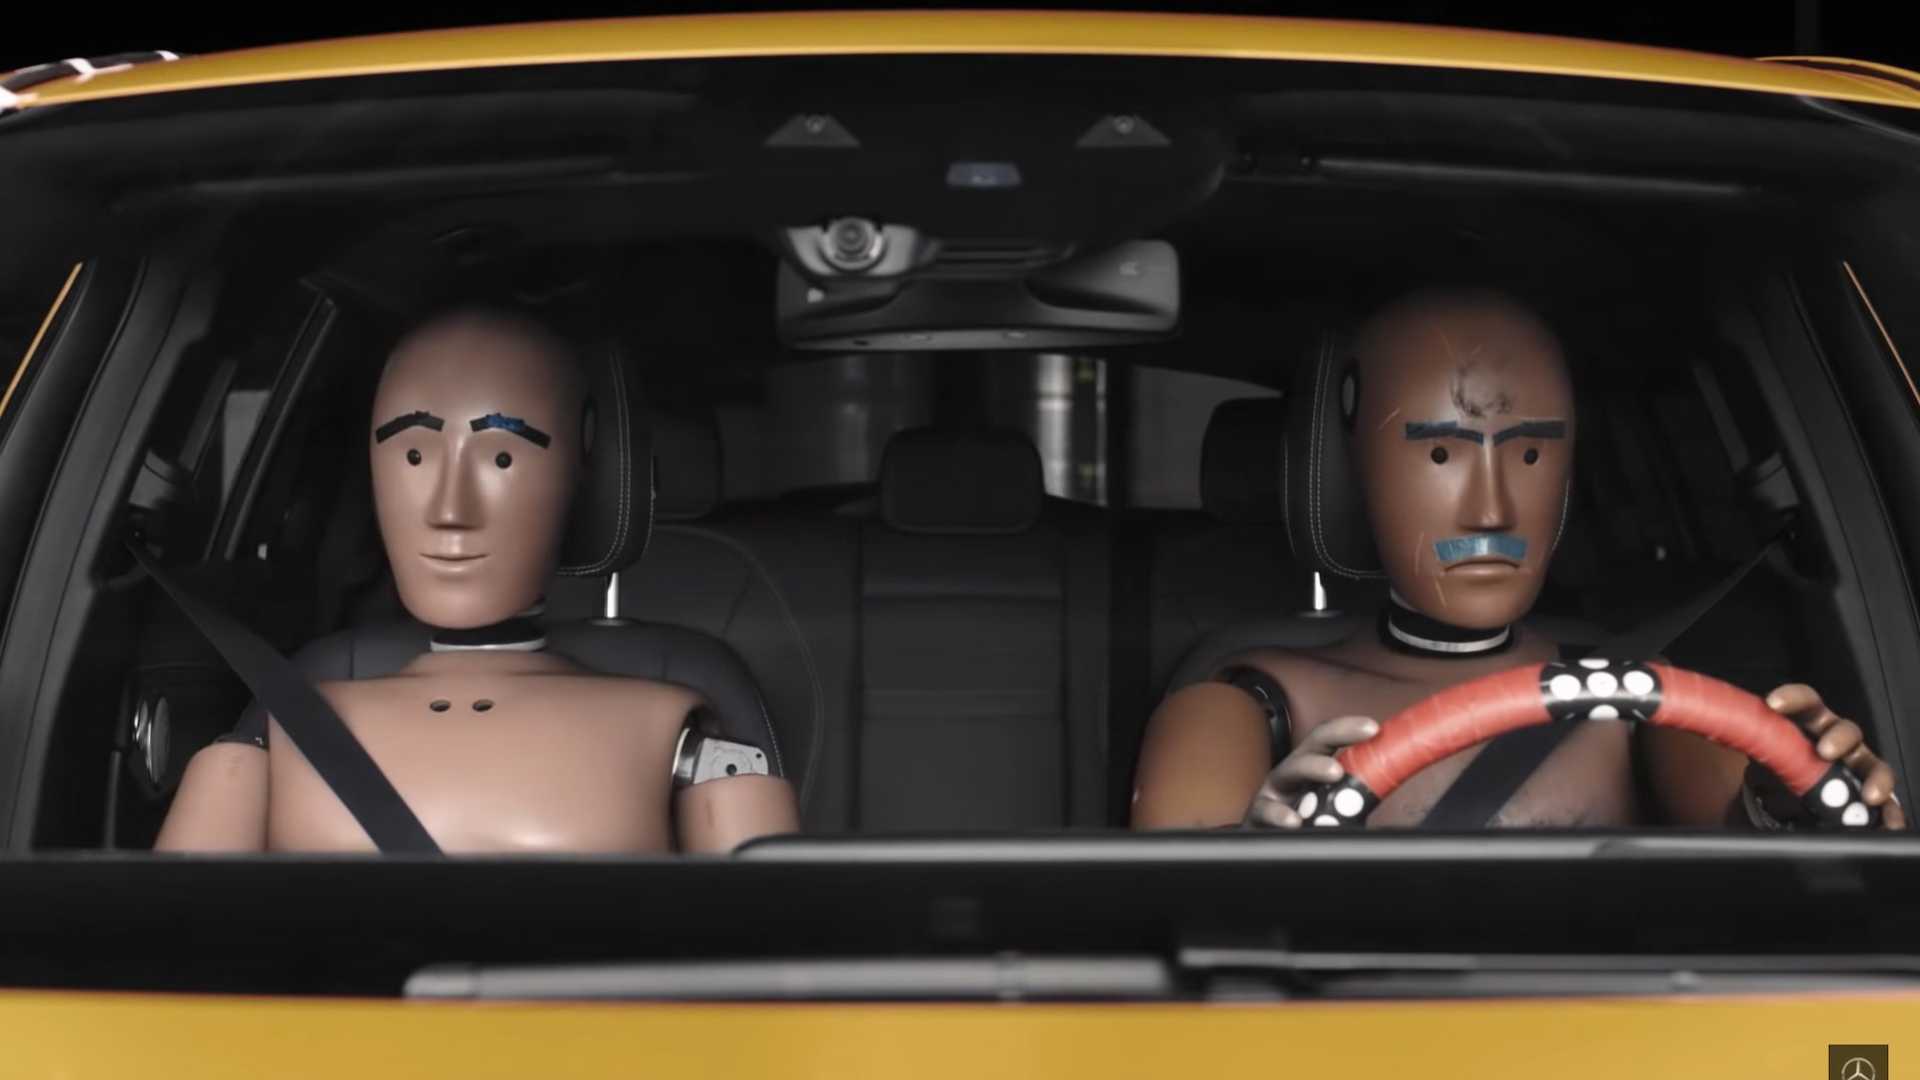 Mercedes crash dummies personified with Xsens motion capture and BEPIC